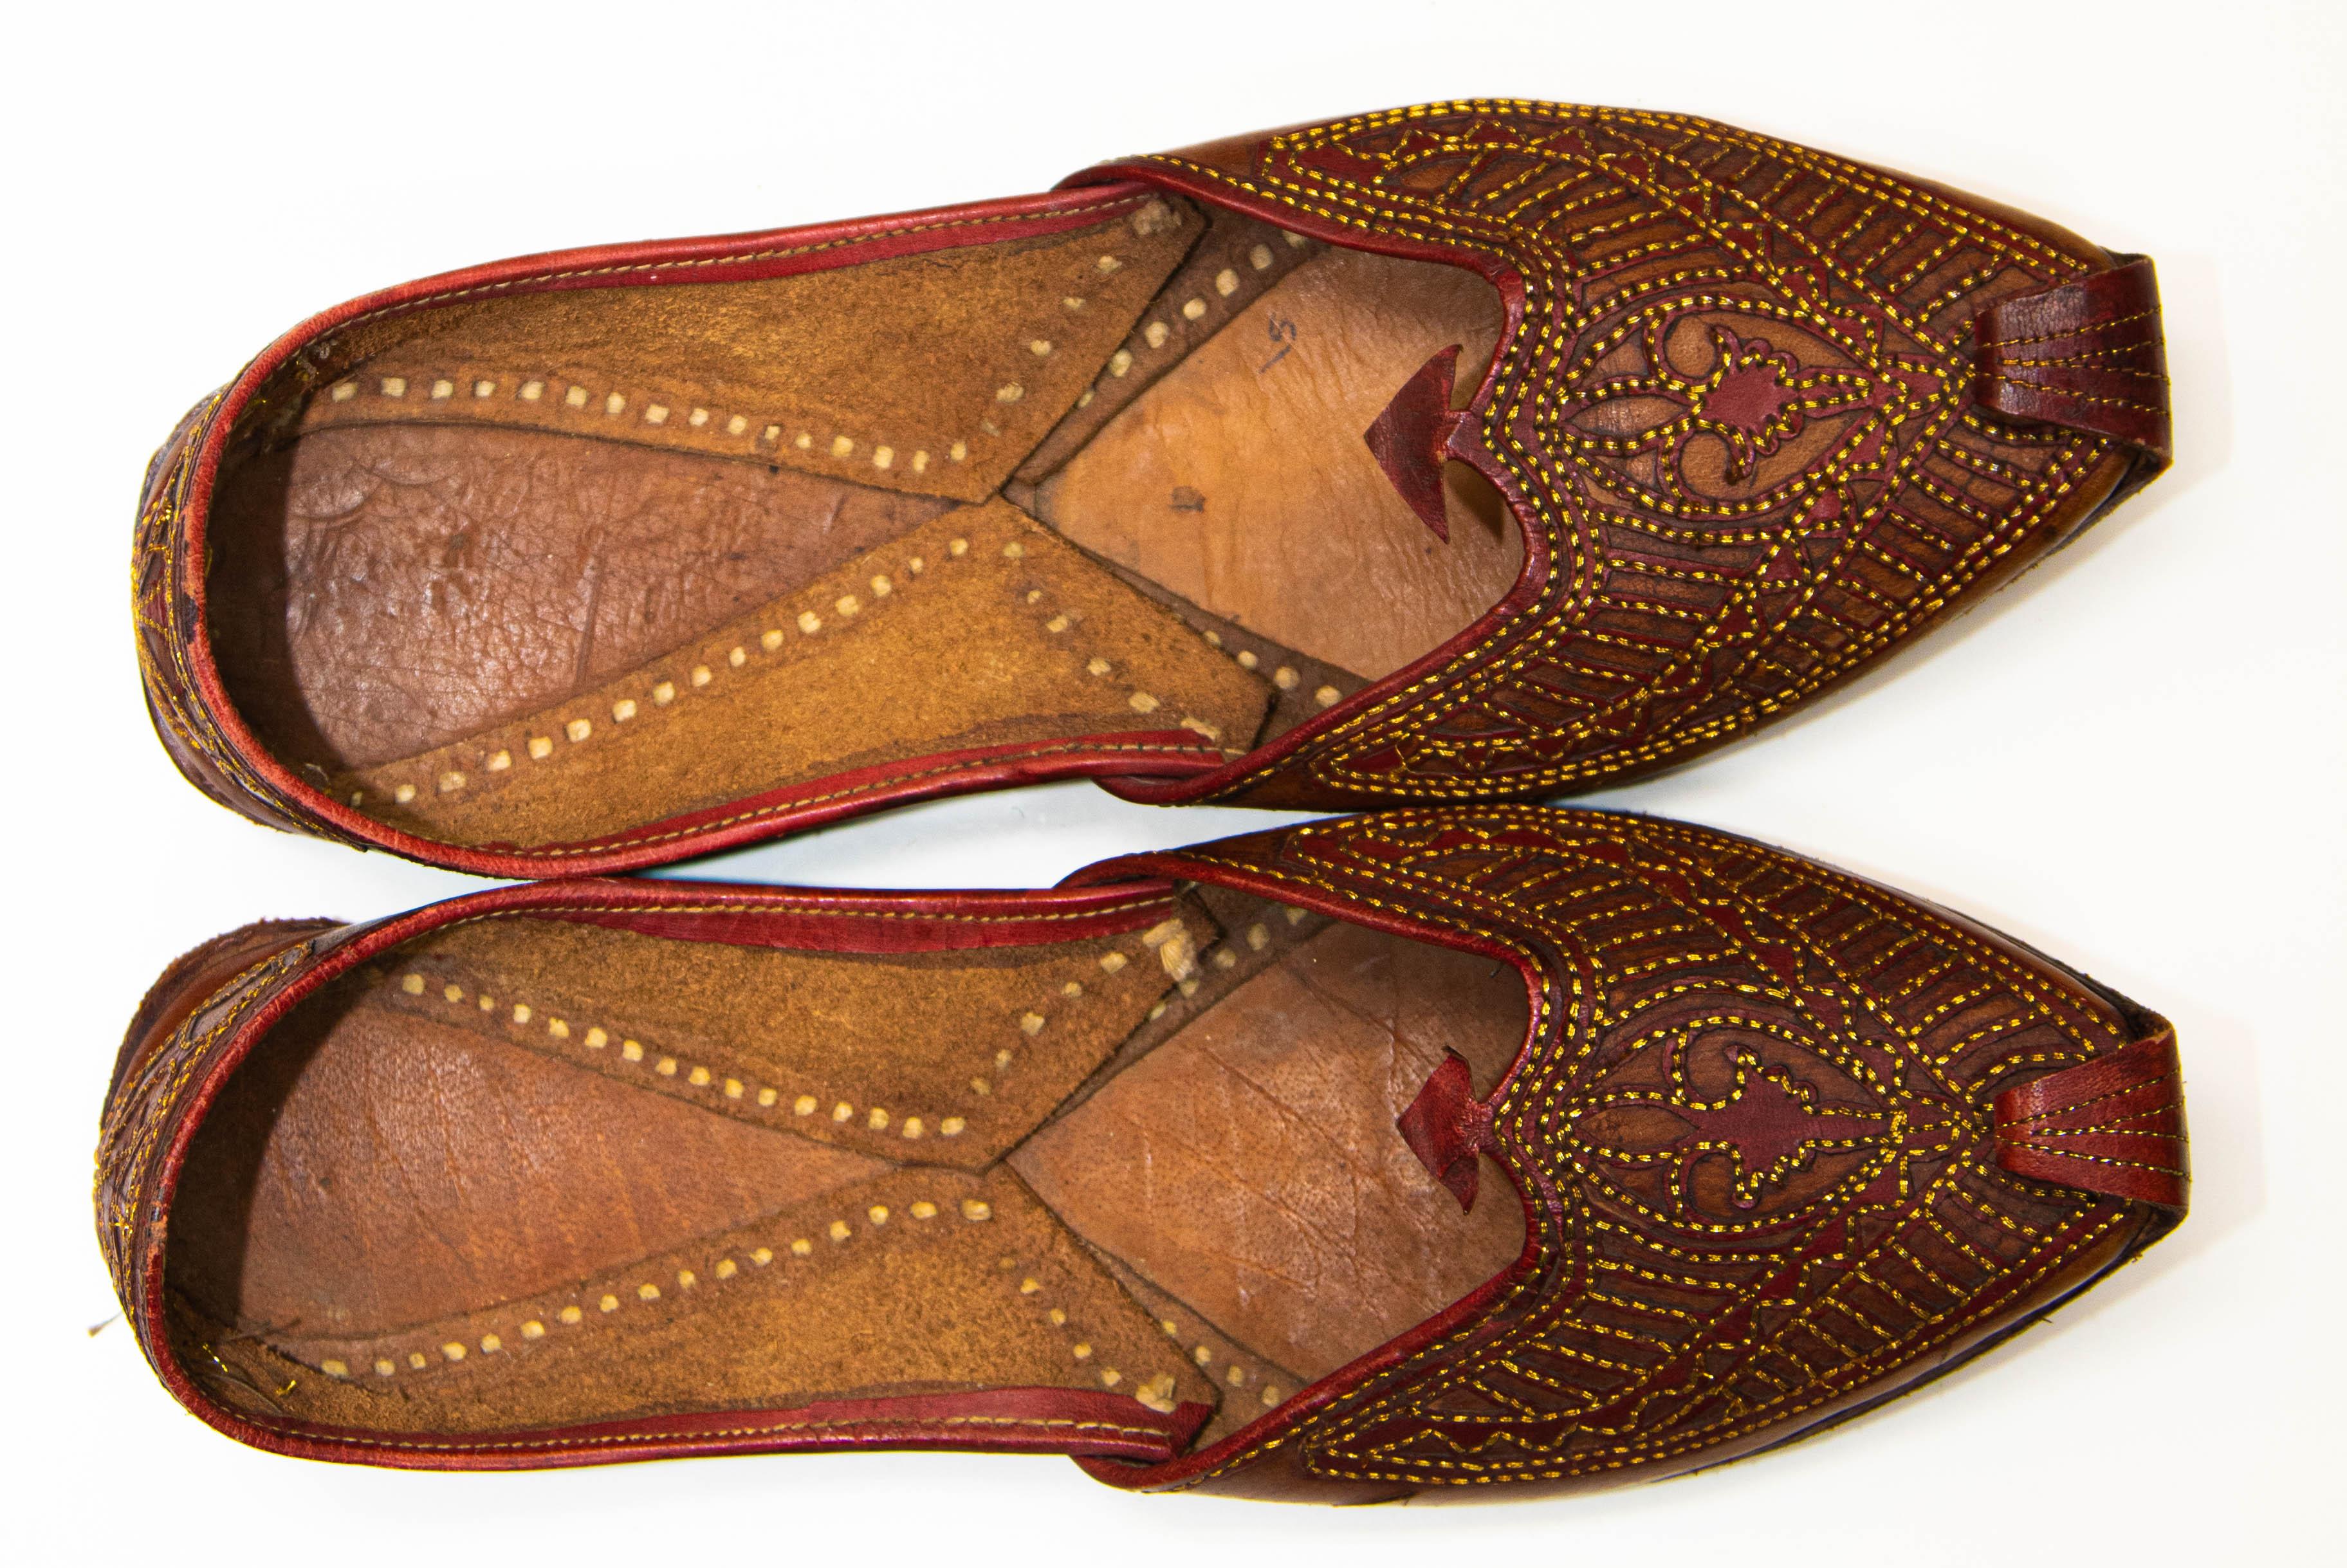 Vintage Arabian Mughal Leather Shoes with Gold Embroidered Curled Toe For Sale 5